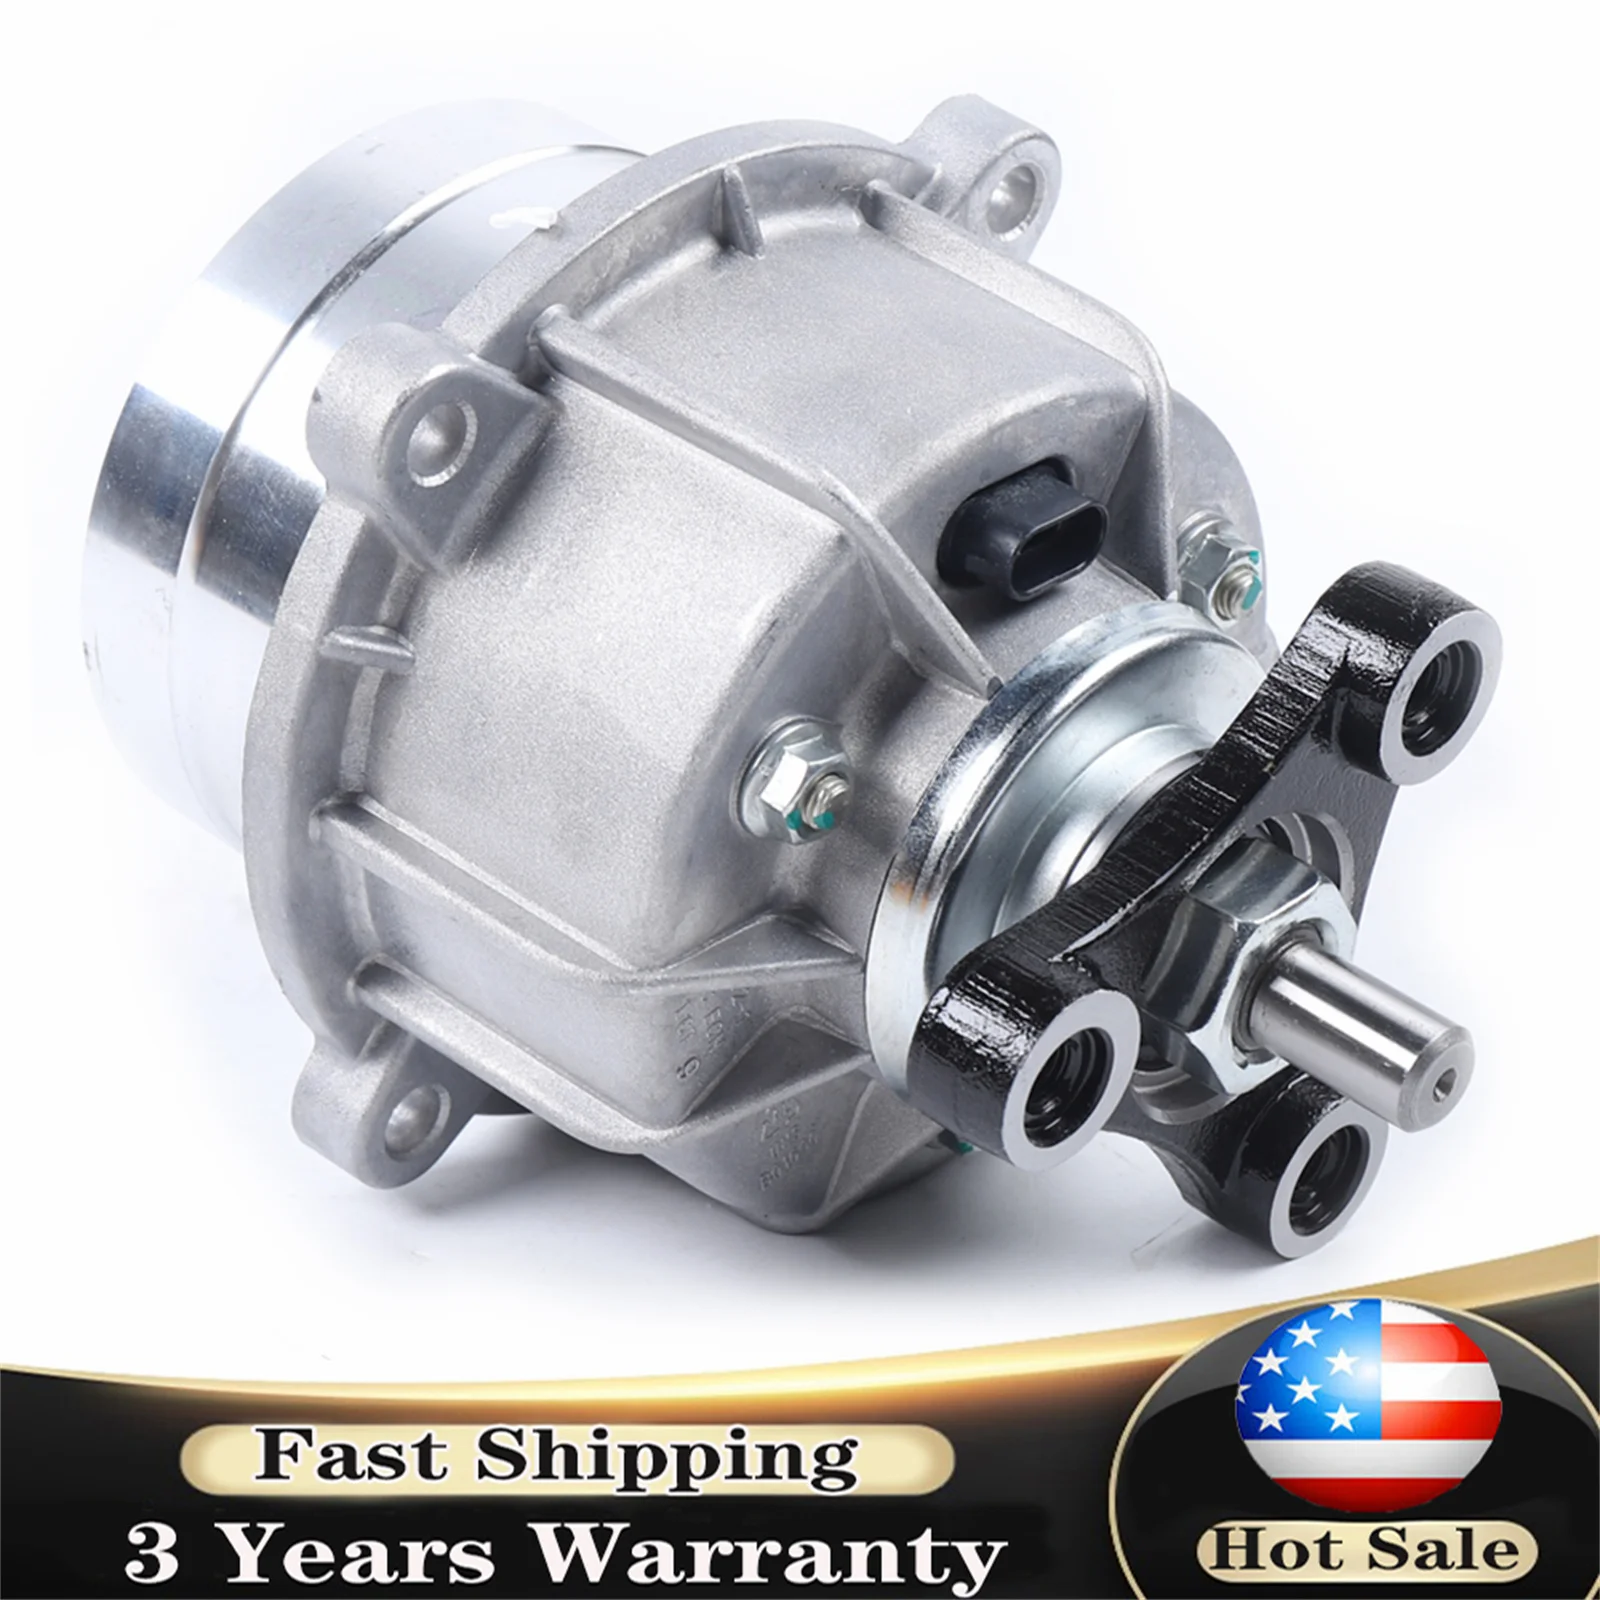 

Rear Differential Coupling Assembly For 2010-2012 Hyundai Santa Fe 2.4L 3.5L 47800-39420 39410